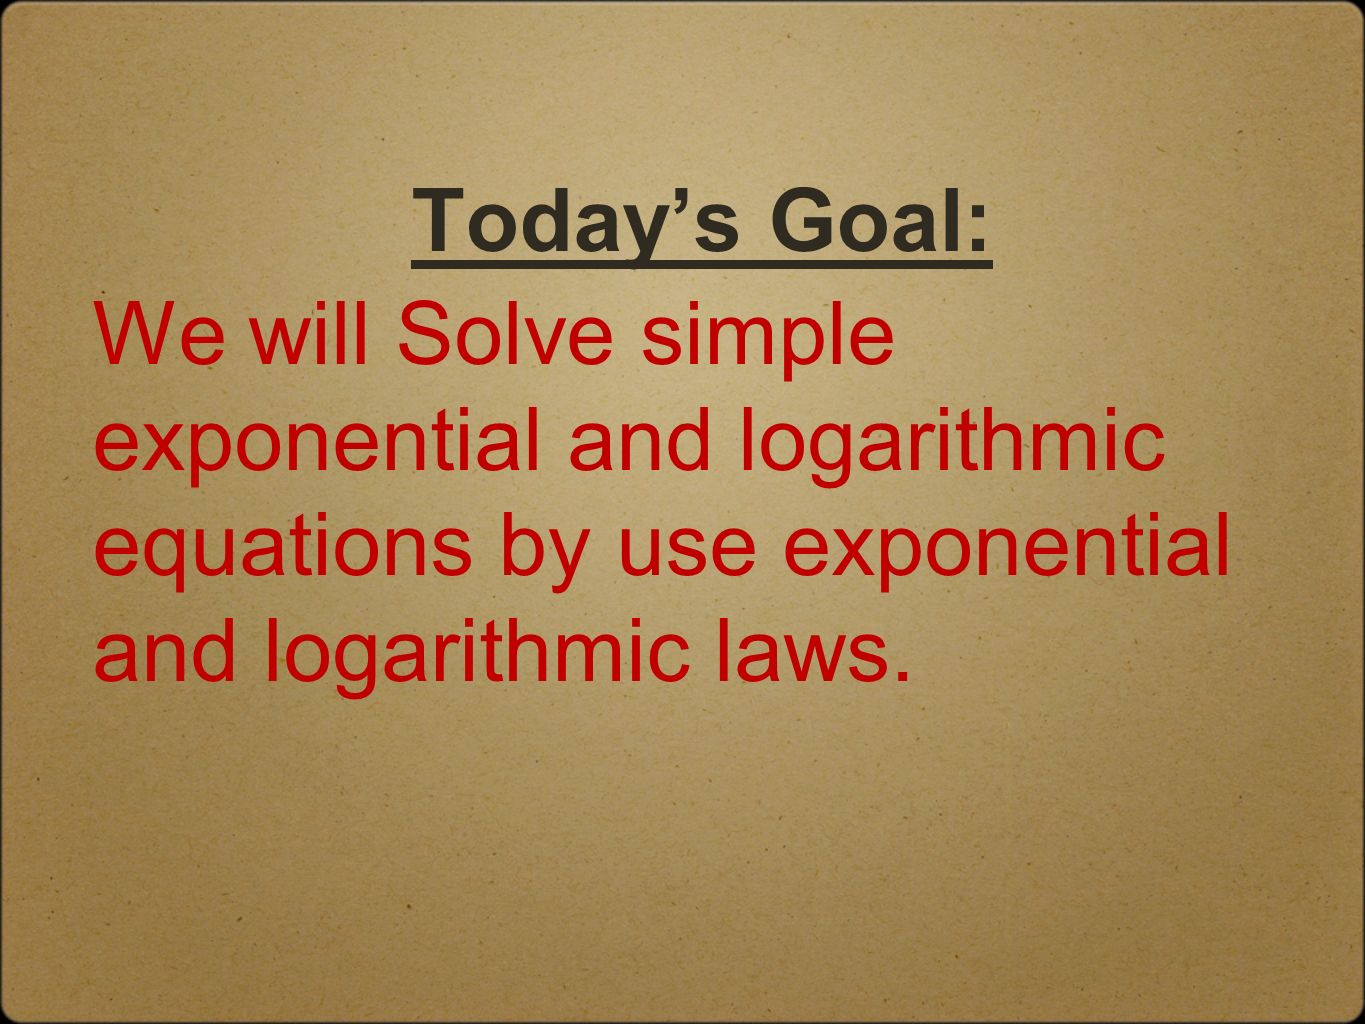 Today’s Goal: We will Solve simple exponential and logarithmic equations by use exponential and logarithmic laws.